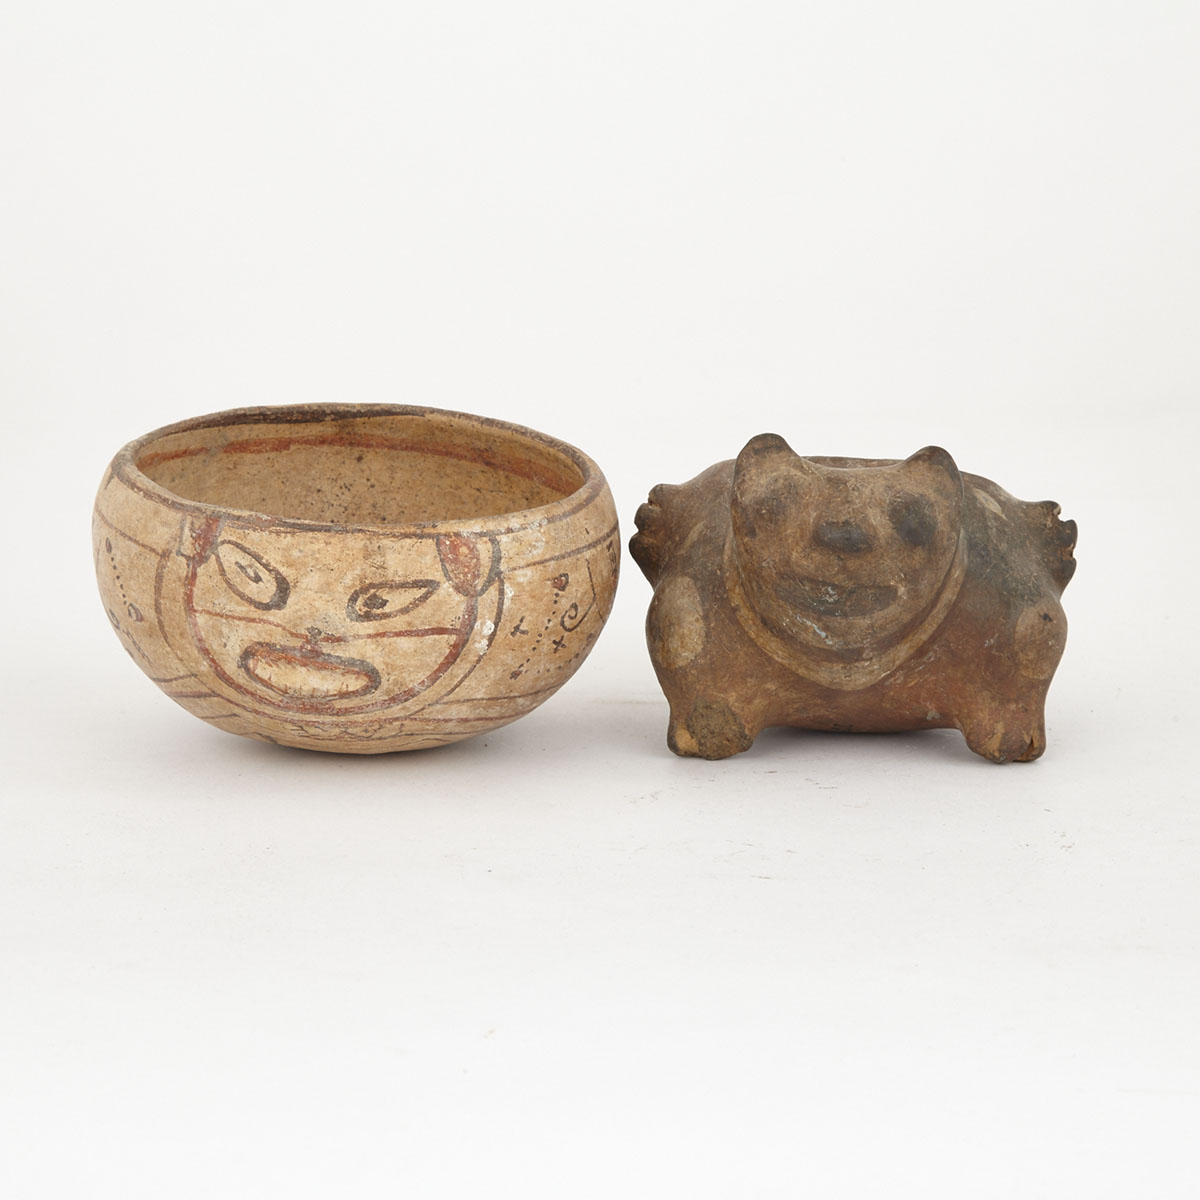 Two Effigy Bowls, possibly Costa Rican